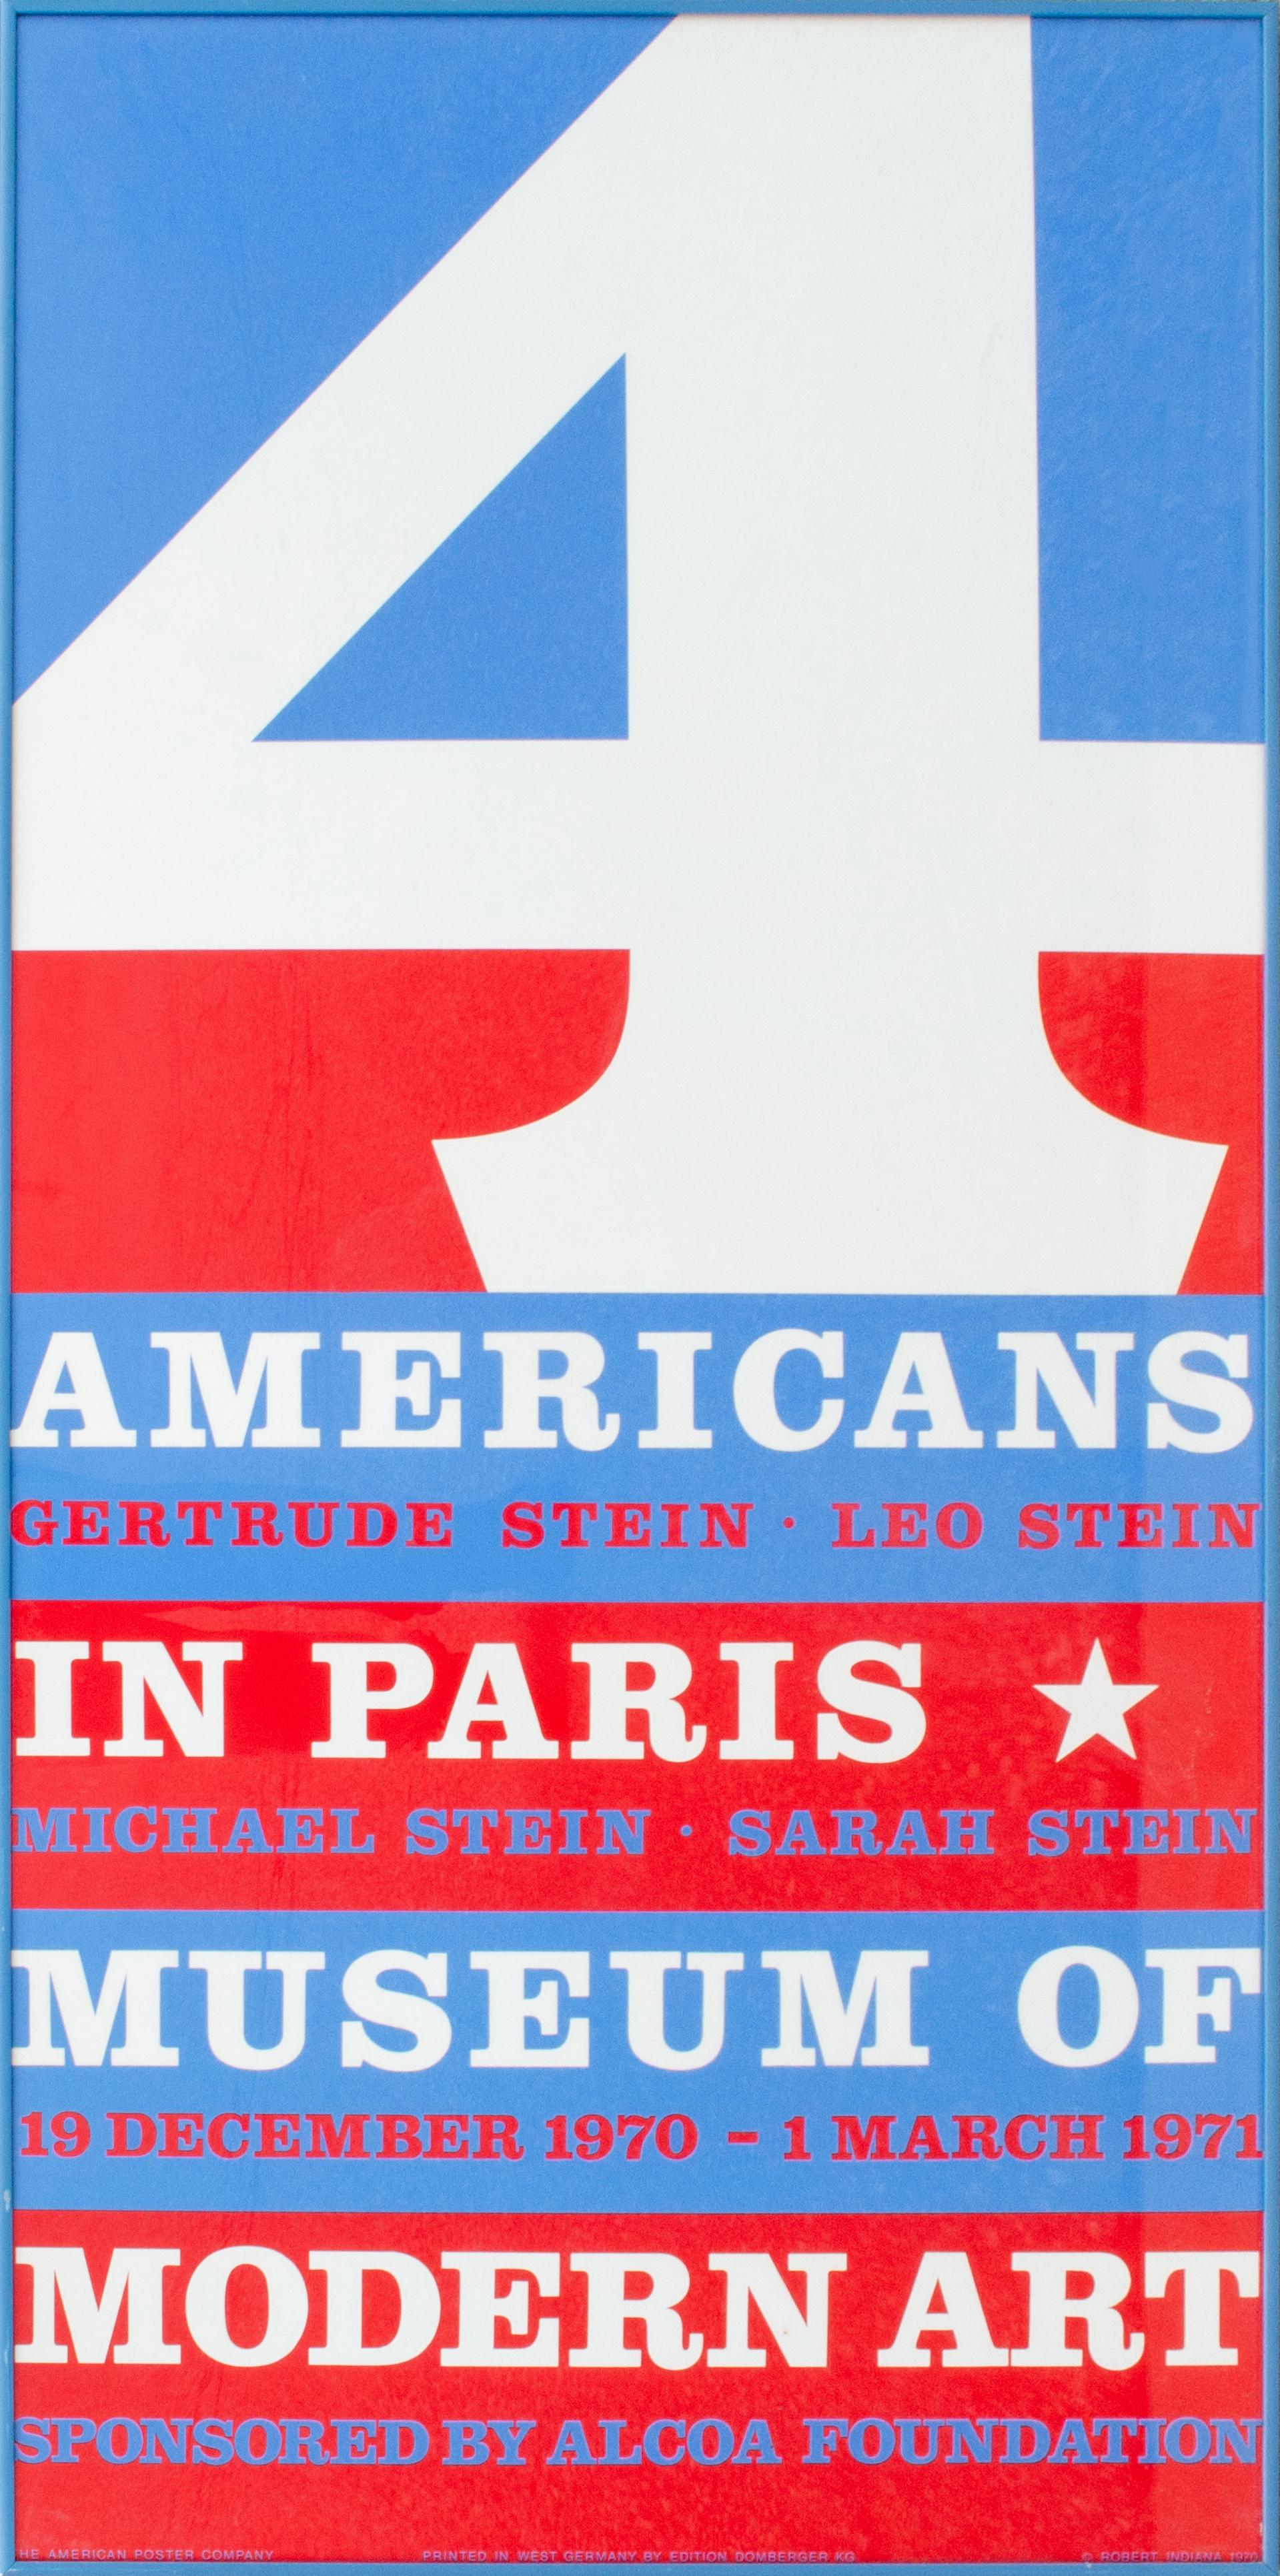 Robert Indianna (American, 1928-2018)
4 Americans in Paris, 1970
Screenprint
Framed: 46 1/4 x 23 x 3/4 in. 
Signed in the plate: (c) R Indiana 1970
Published by American Image, distributed by Fotofolio

Text along lower margin:  The American Poster